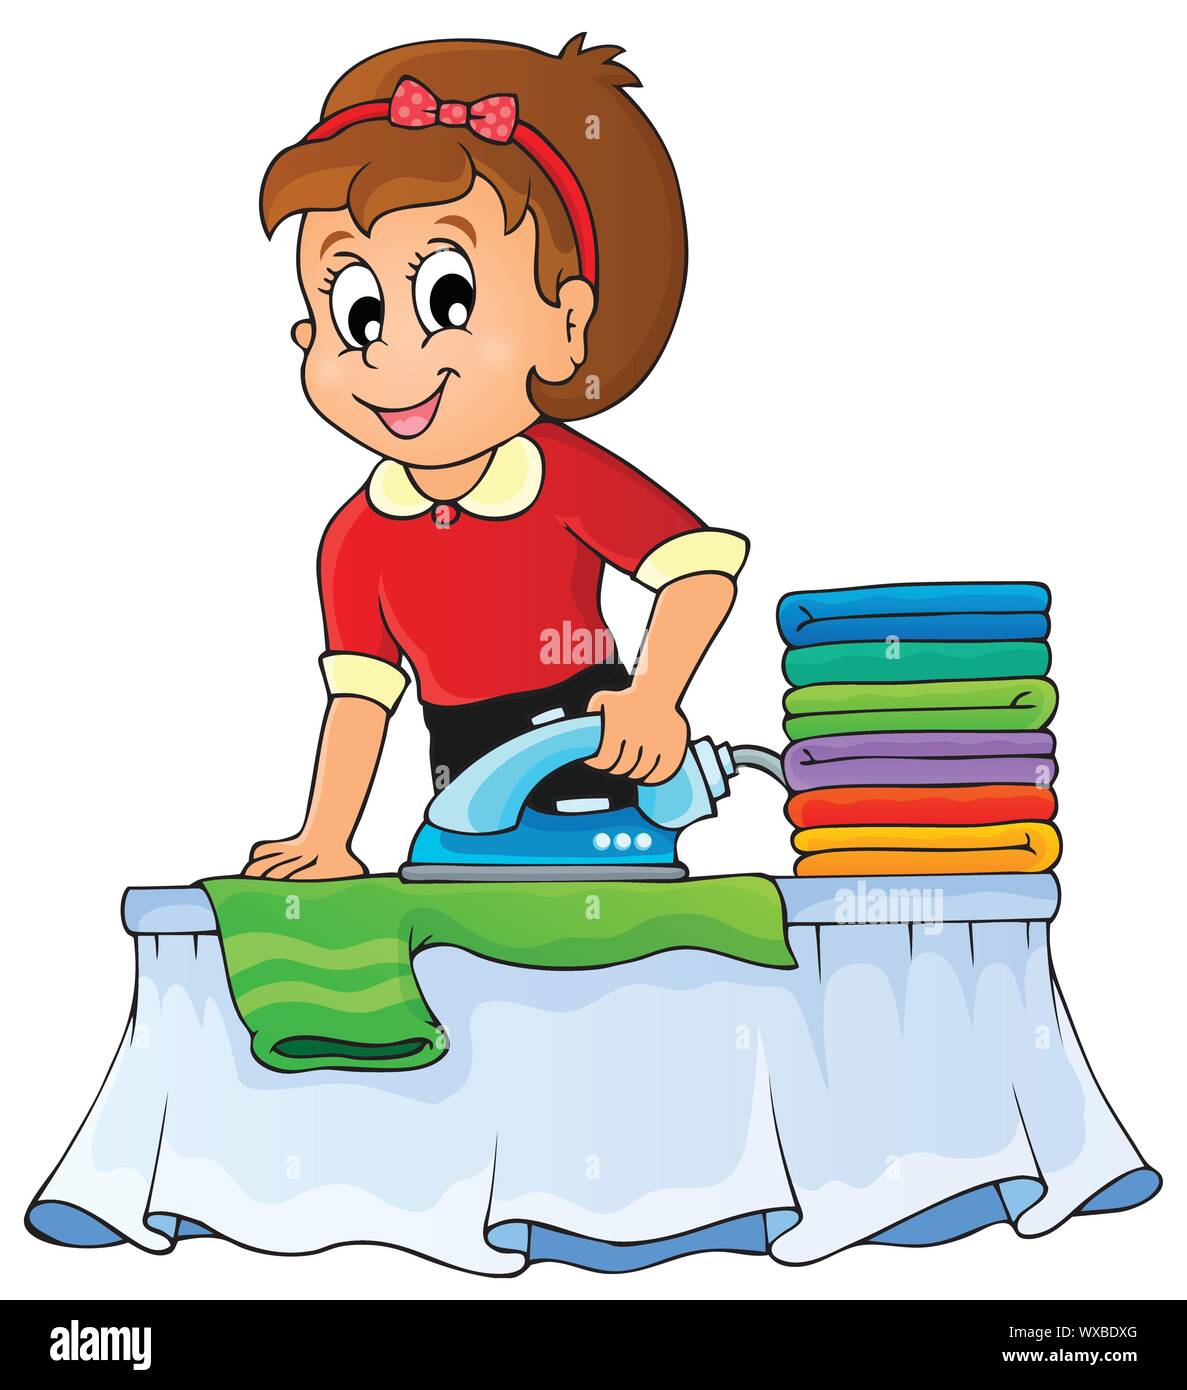 Housewife topic image 1 Stock Vector